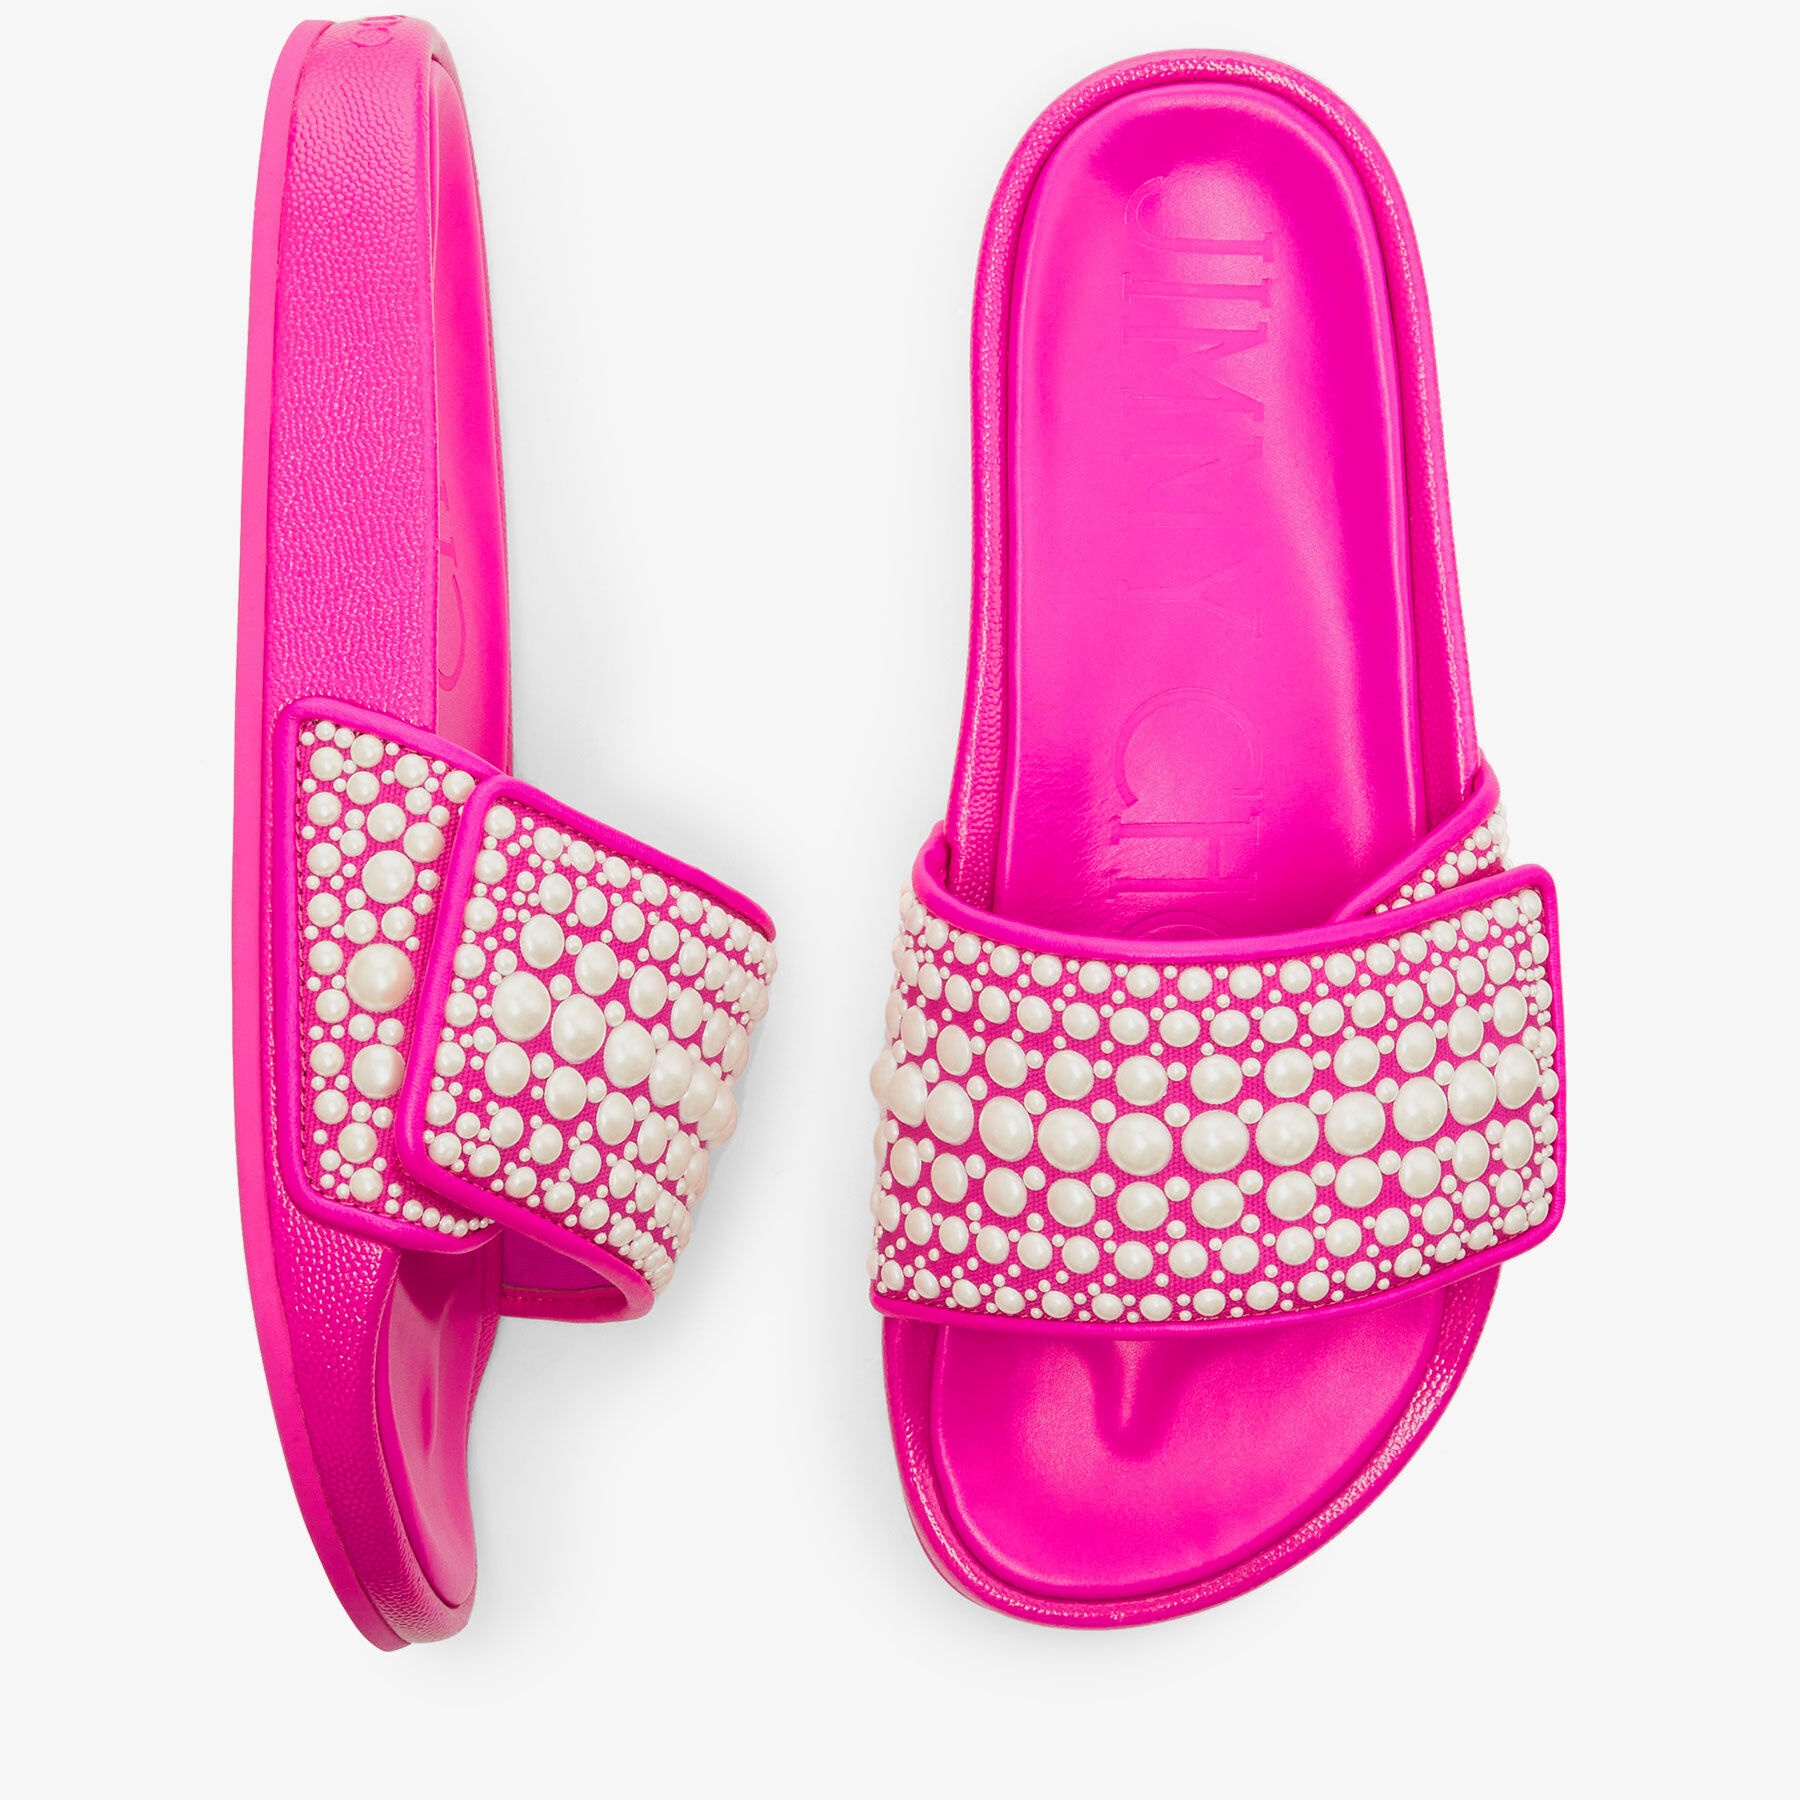 Fitz/F
Fuchsia Leather and Canvas Slides with Pearl Embellishment - 5